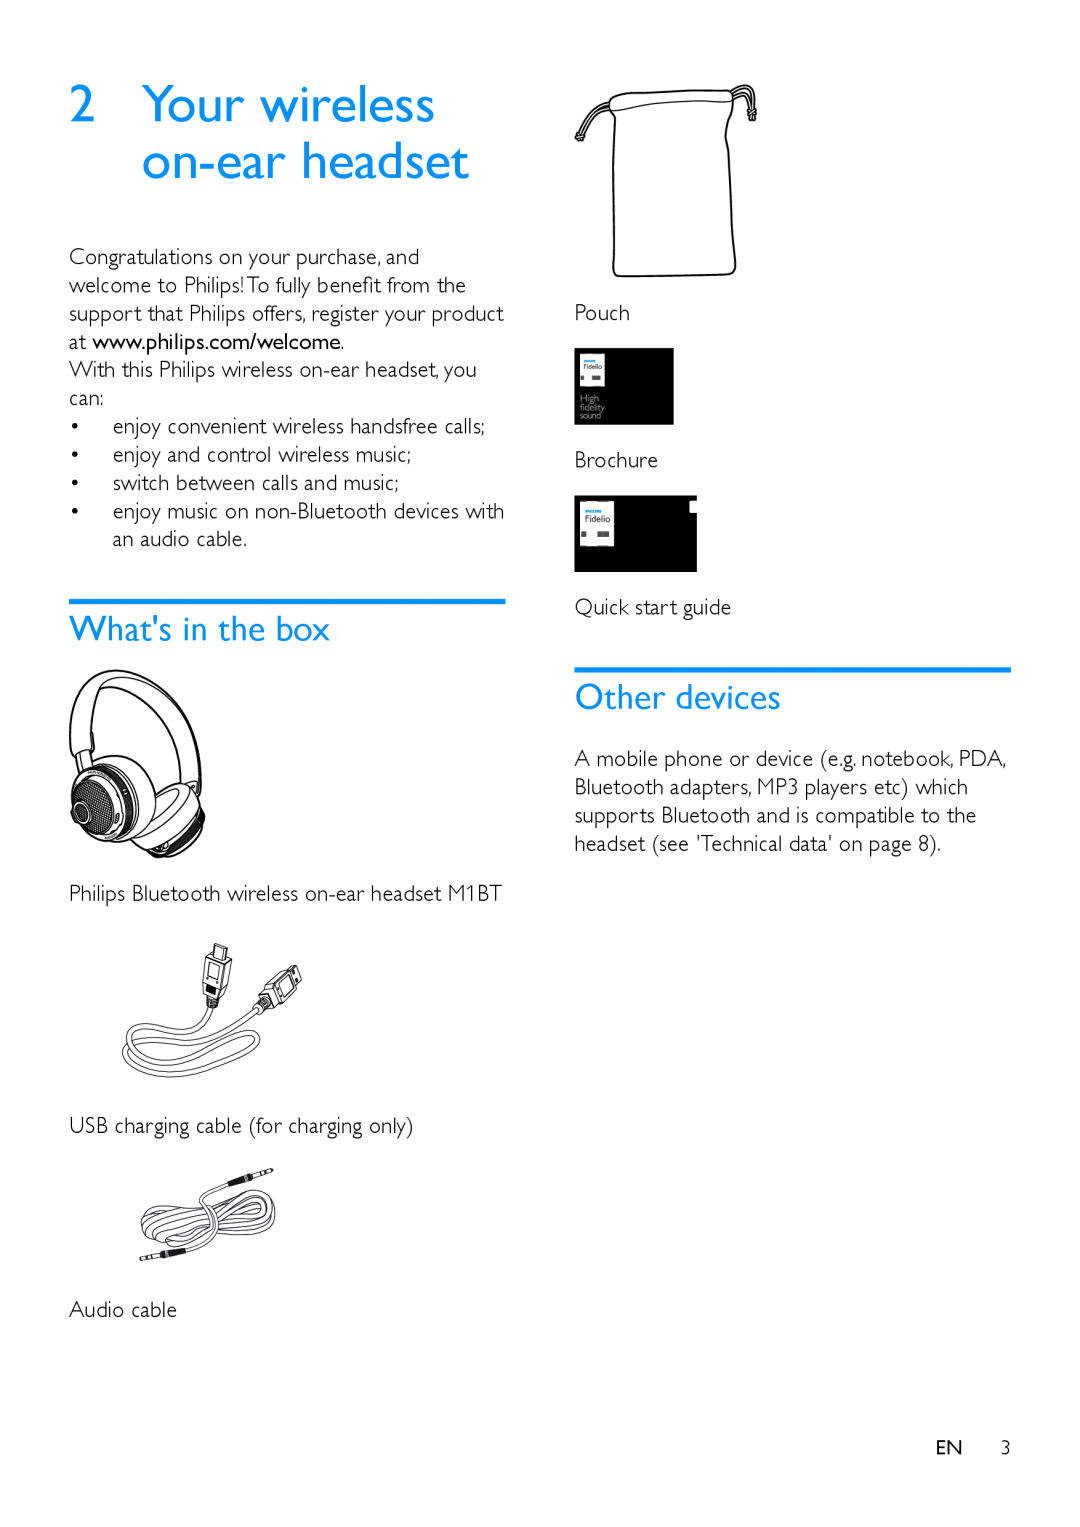 Philips M1BT user manual 2Your wireless on-earheadset, Whats in the box, Other devices 